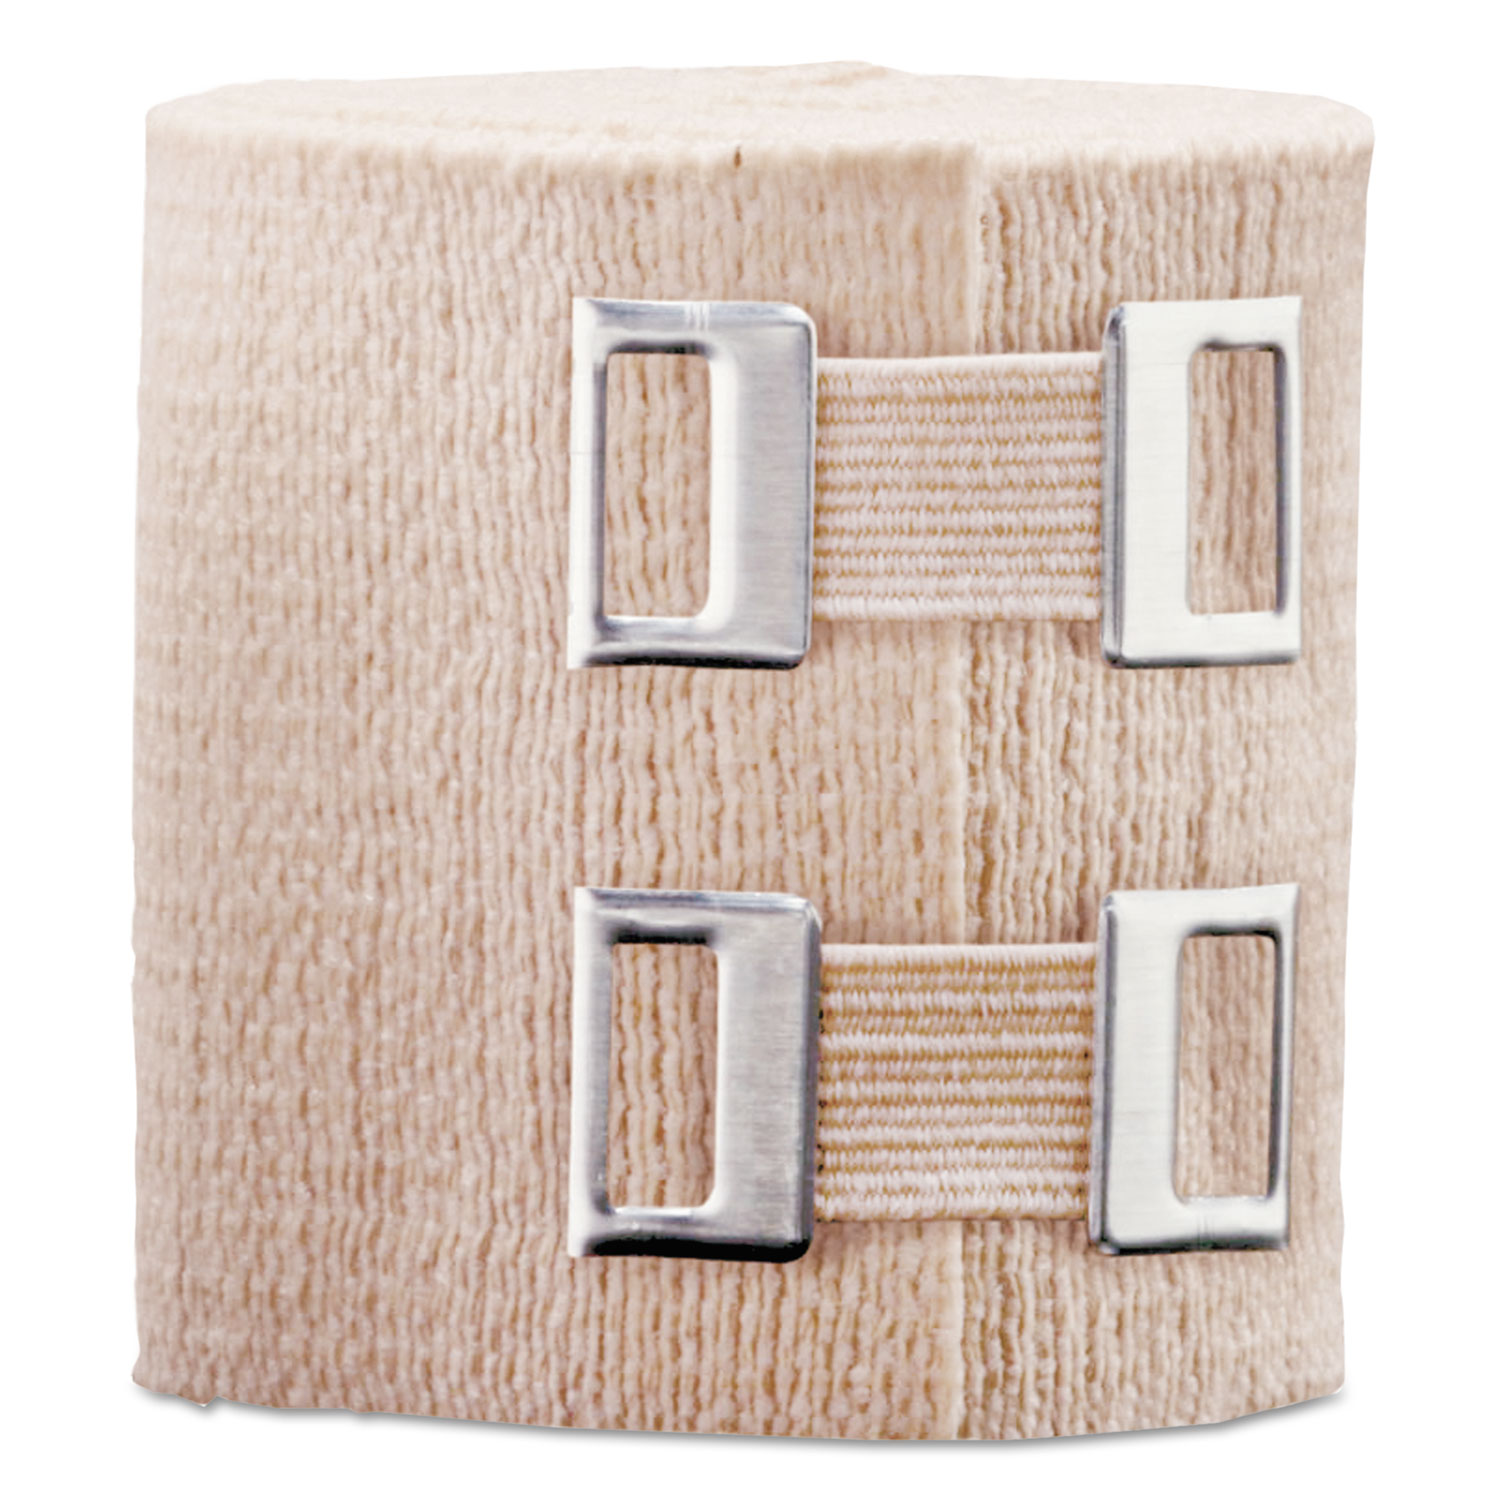 Elastic Bandage with E-Z Clips, 2 x 50